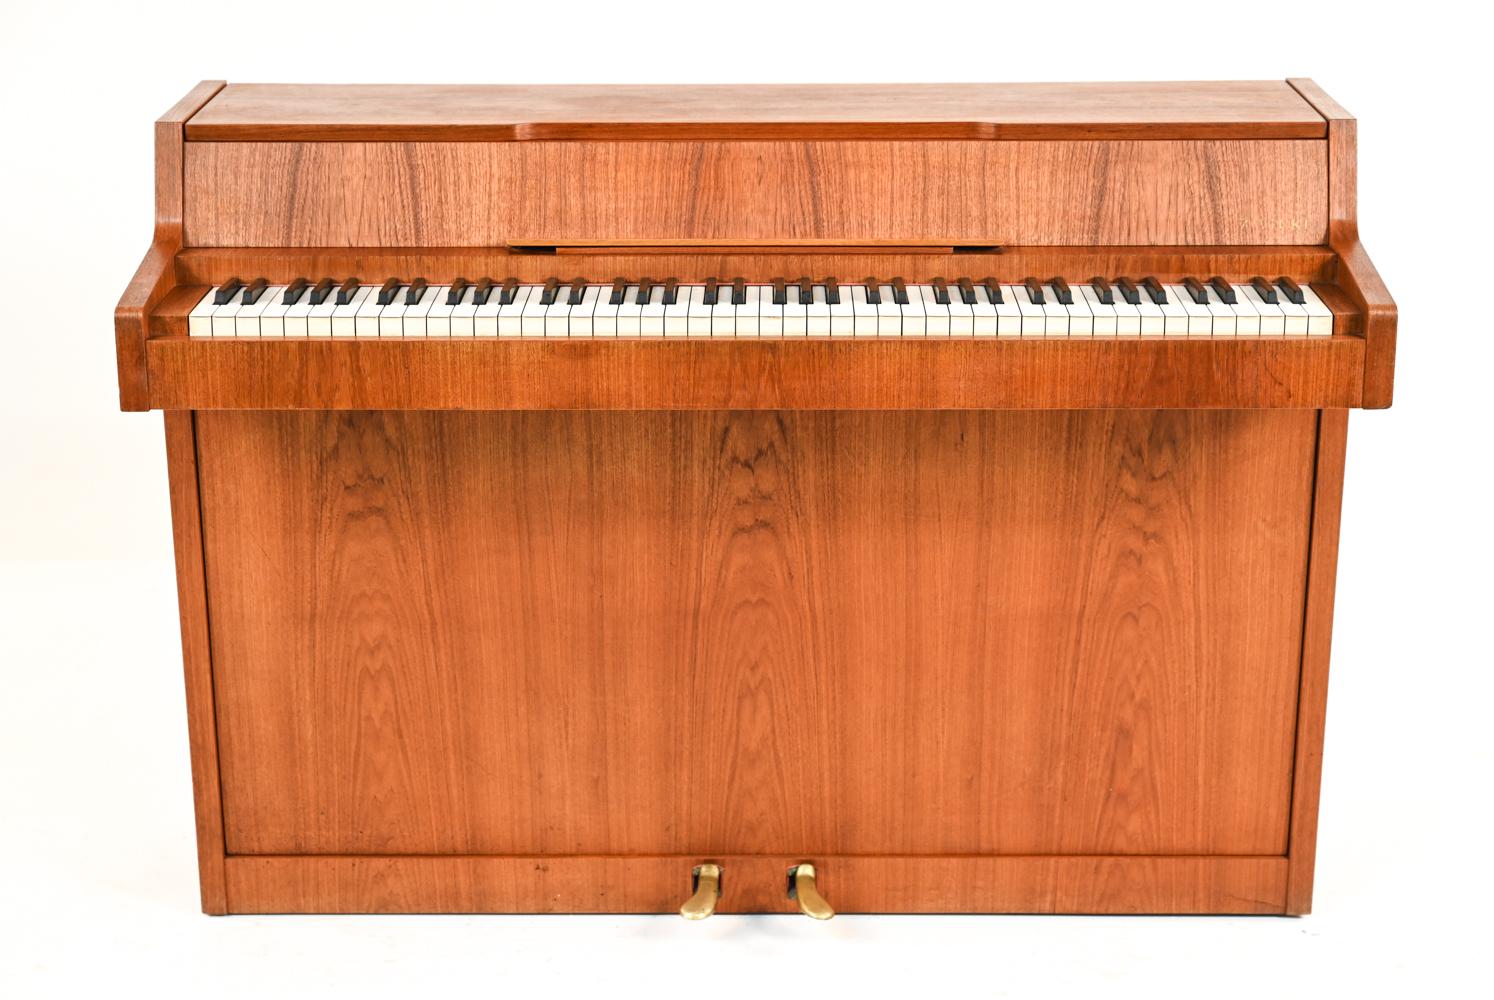 A rare mid-century Danish piano, made of beautiful teak. It is called a pianette because of its 82 keys rather than the standard 88 keys of a full-size piano. This piano is made by the famous piano maker Louis Zwicki. Every piano by Louis Zwicki is